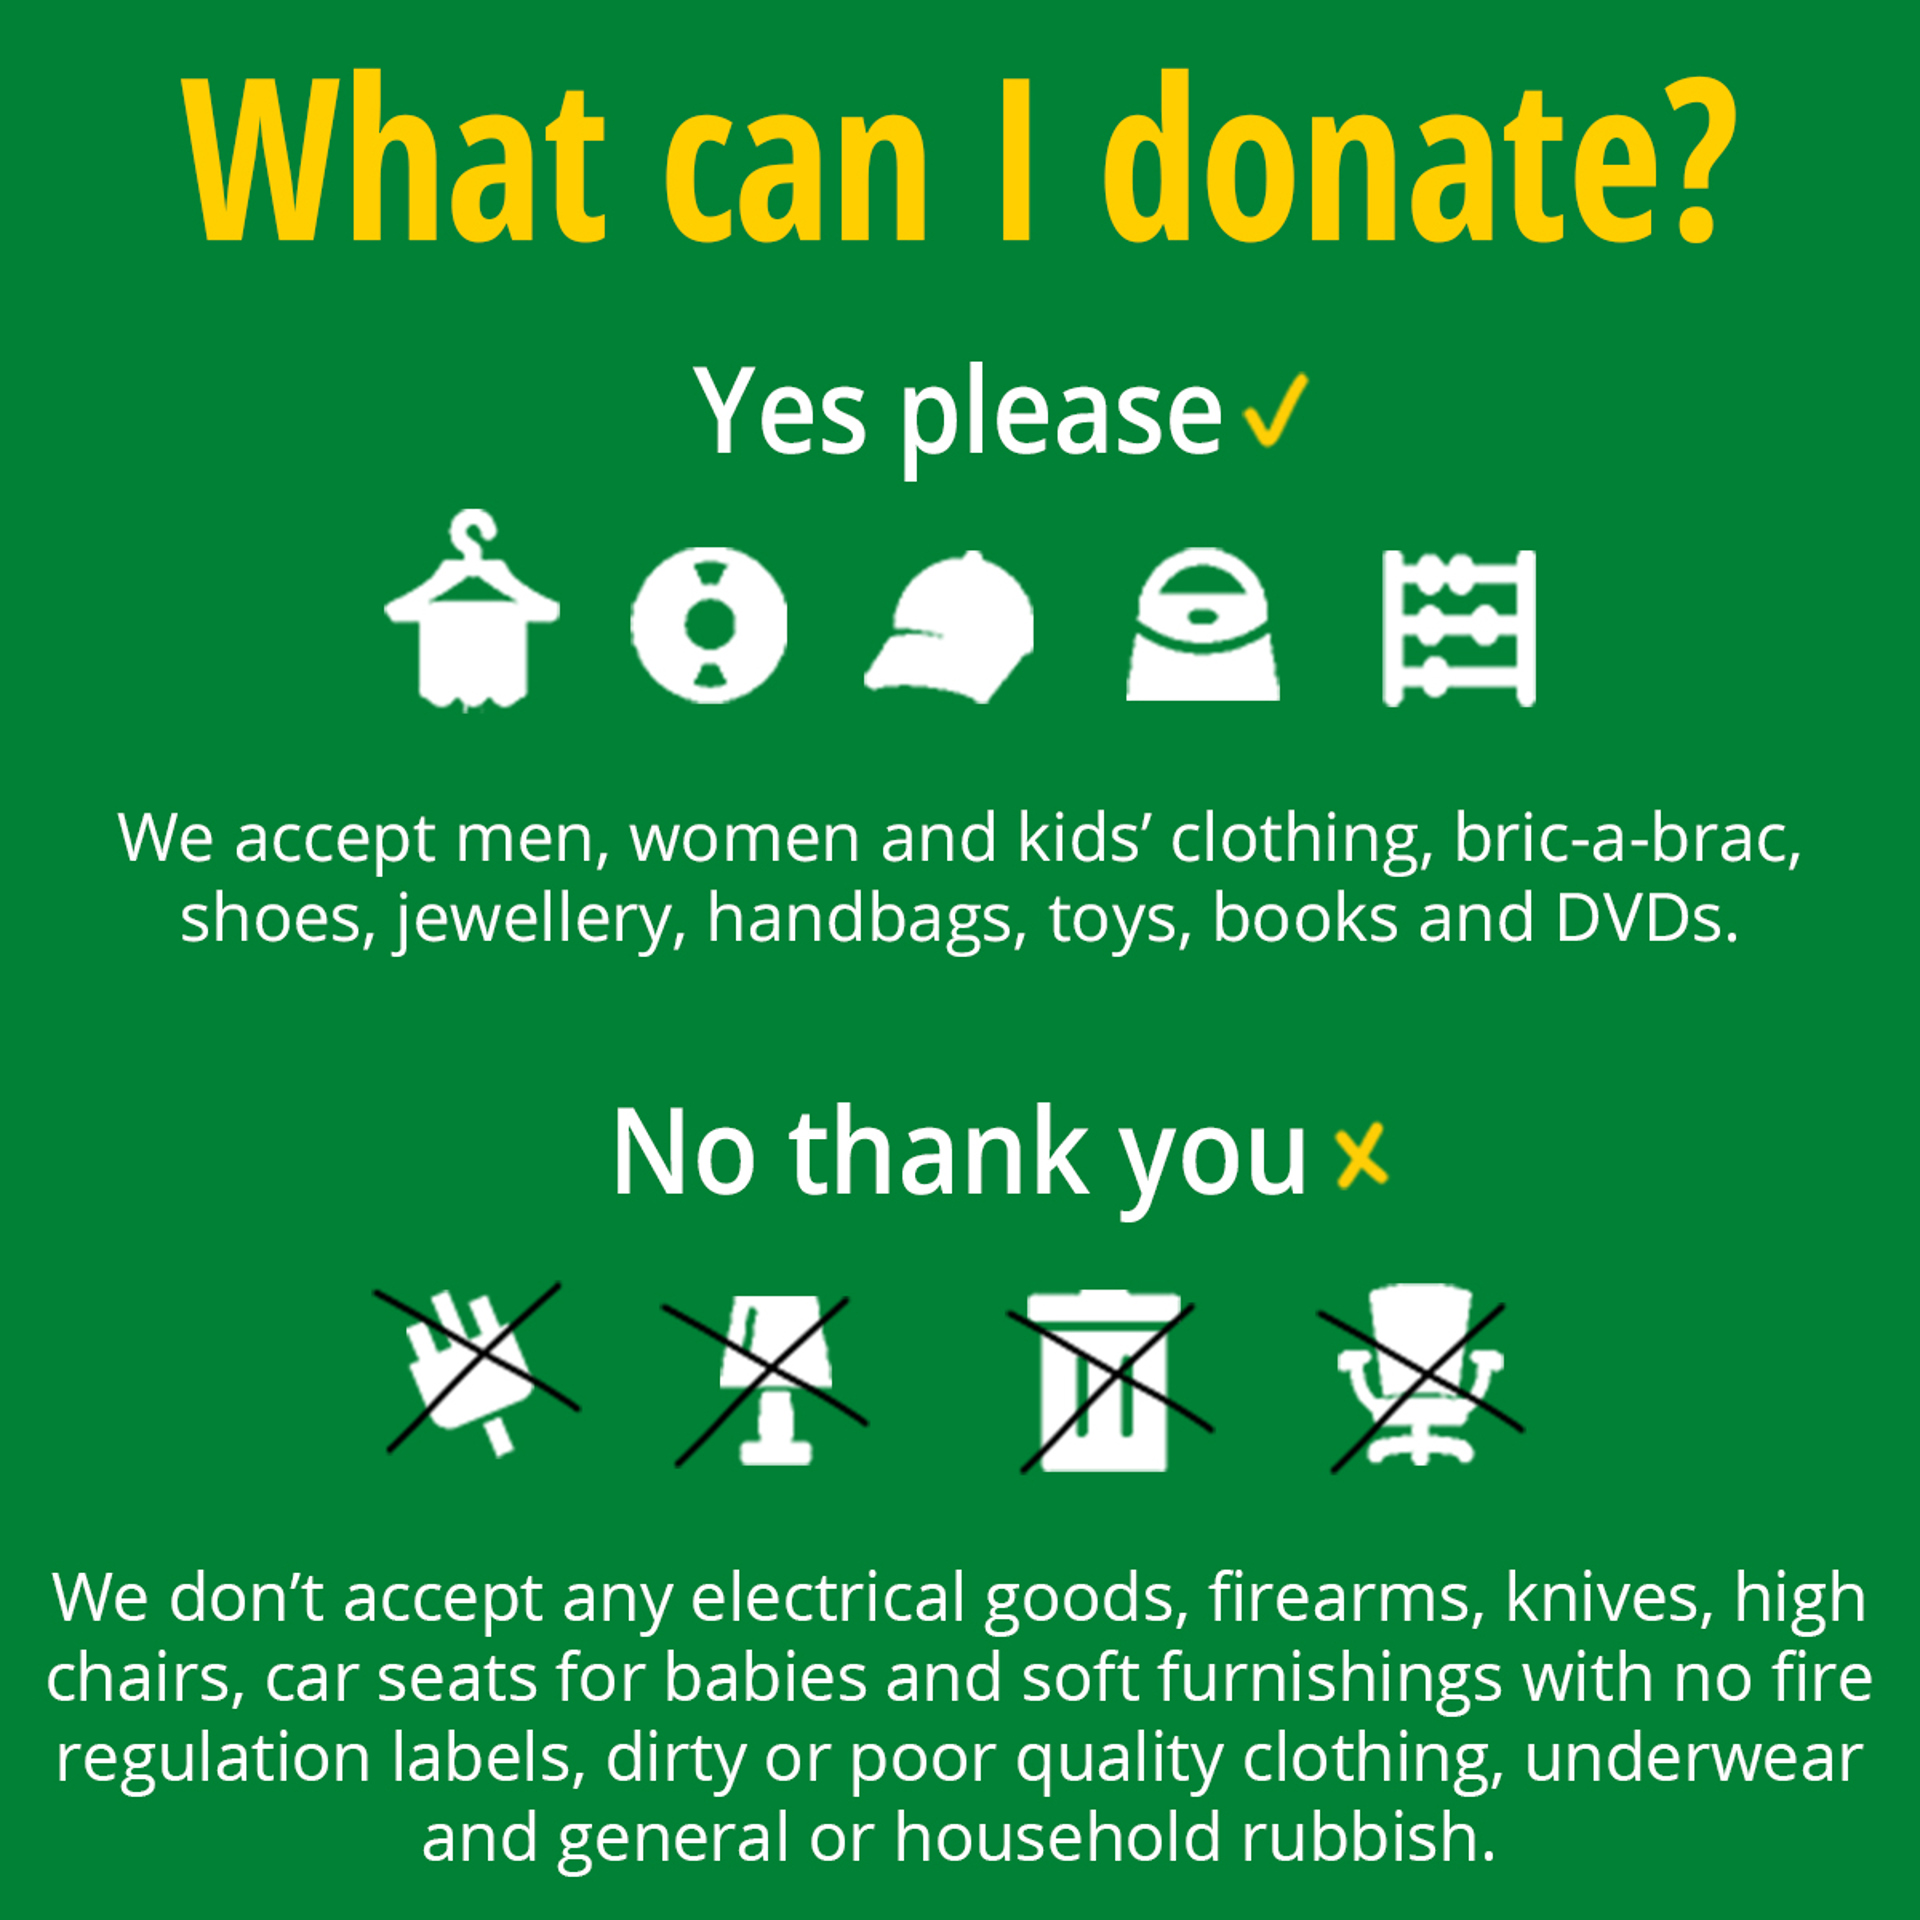 An infographic describing acceptable and unacceptable items at the Devizes Charity Shop